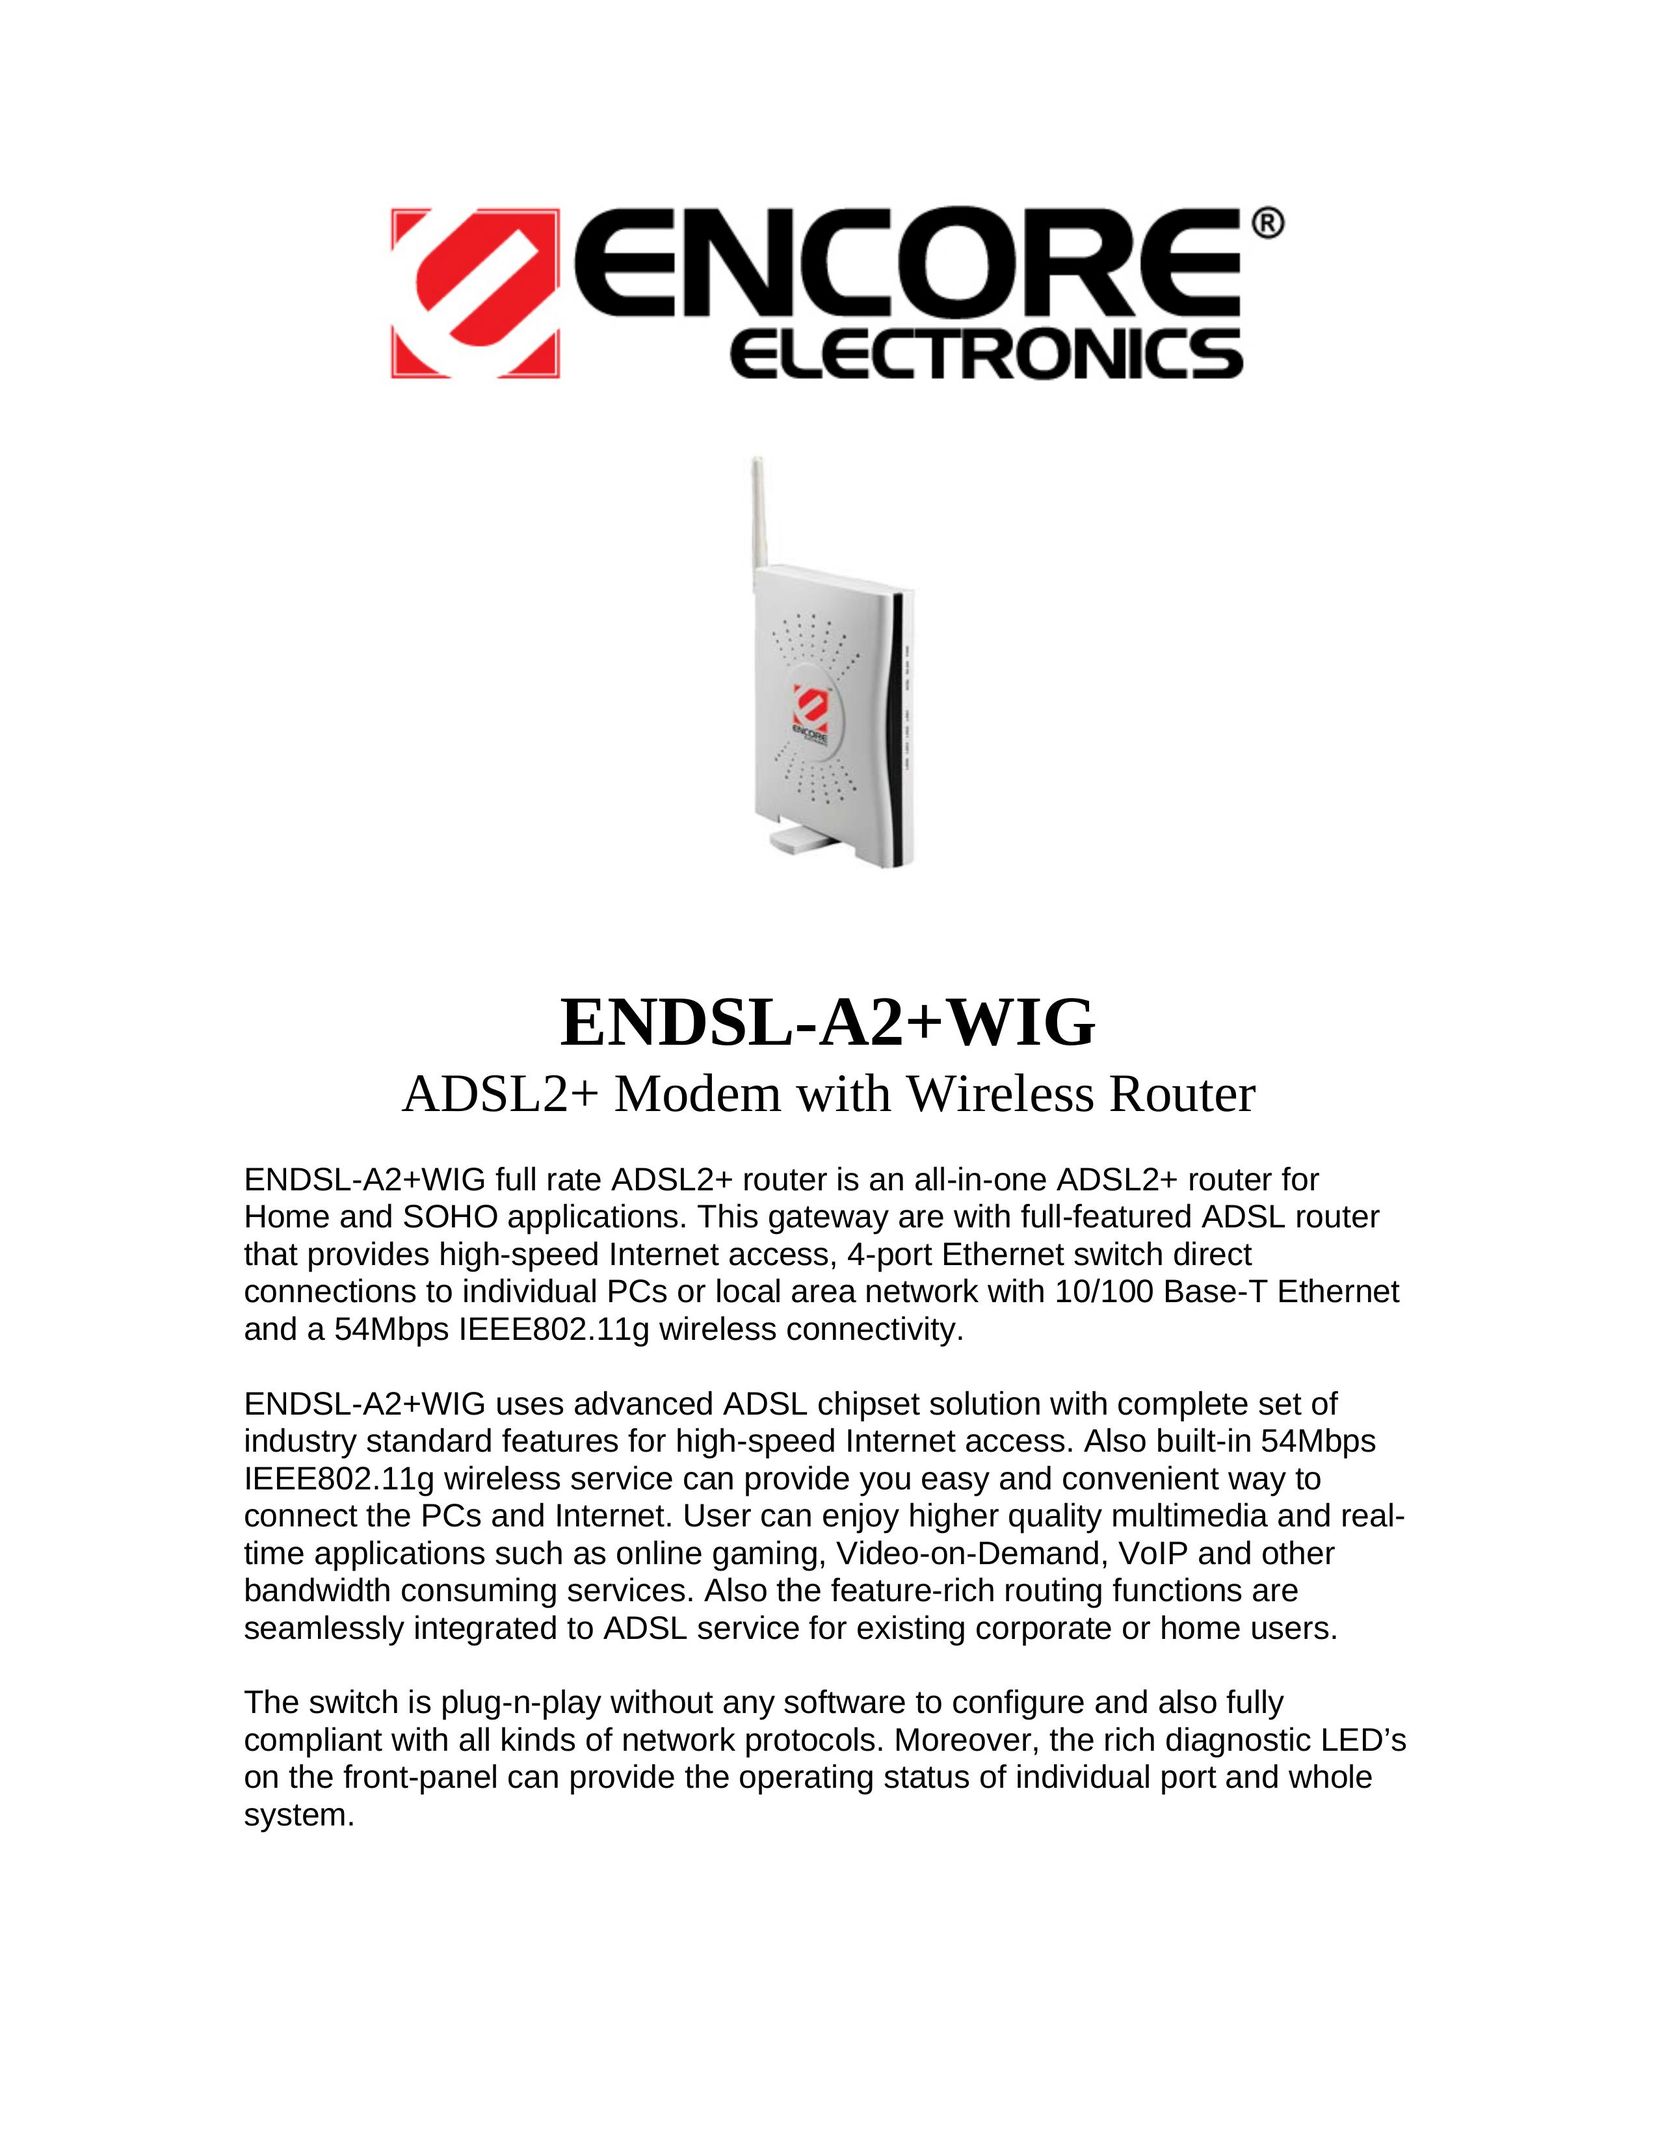 Encore electronic ENDSL-A2+WIG Network Router User Manual